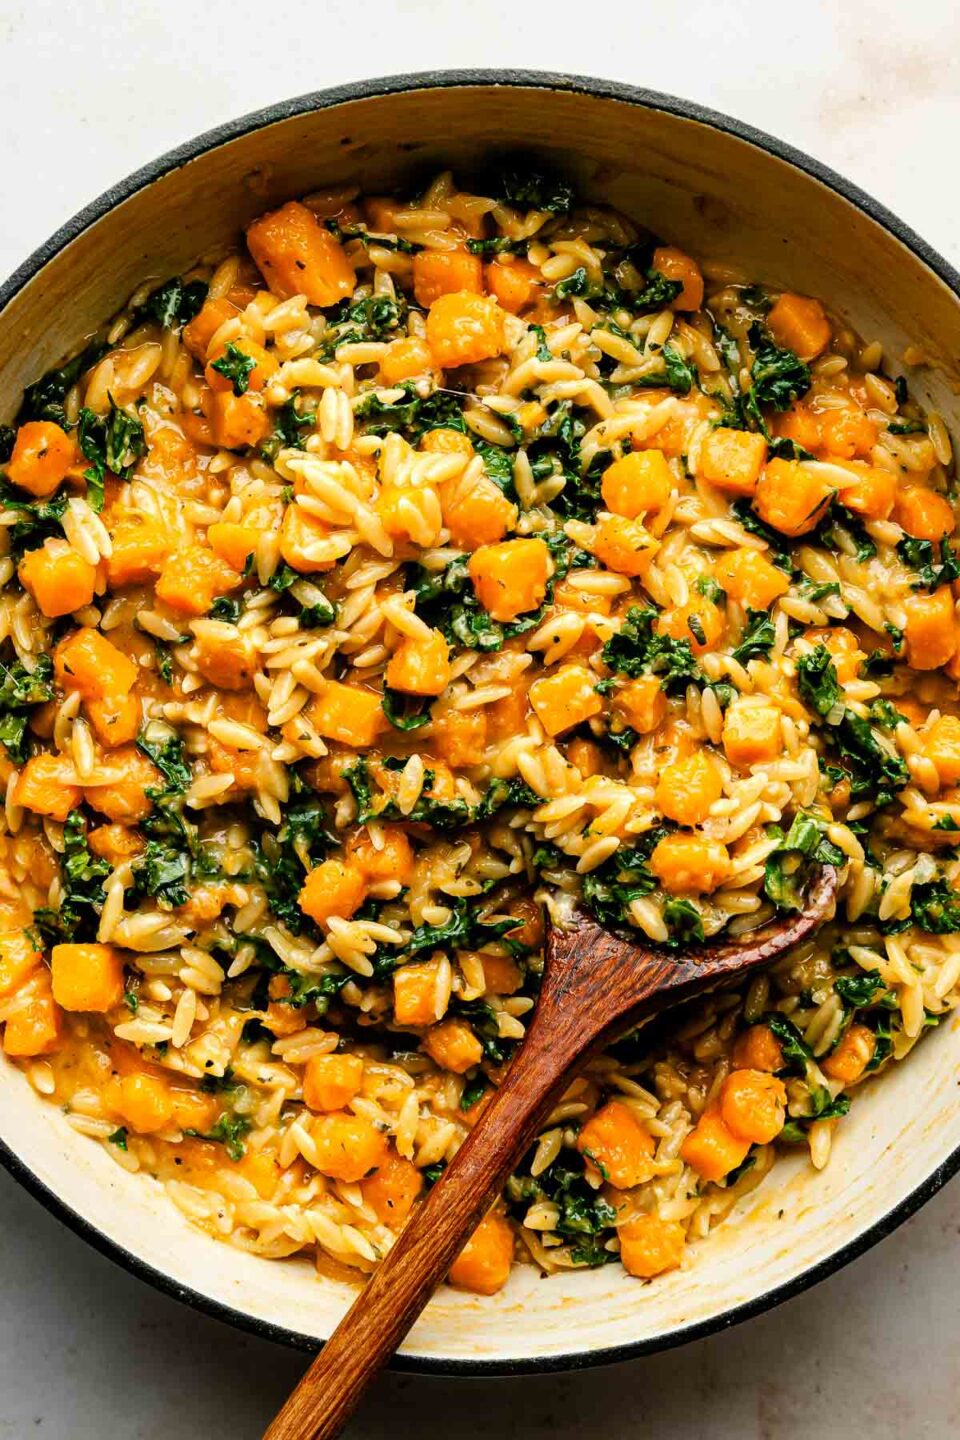 An overhead shot of a wooden spoon resting in a skillet full of cooked squash, kale and orzo atop a textured off-white surface.